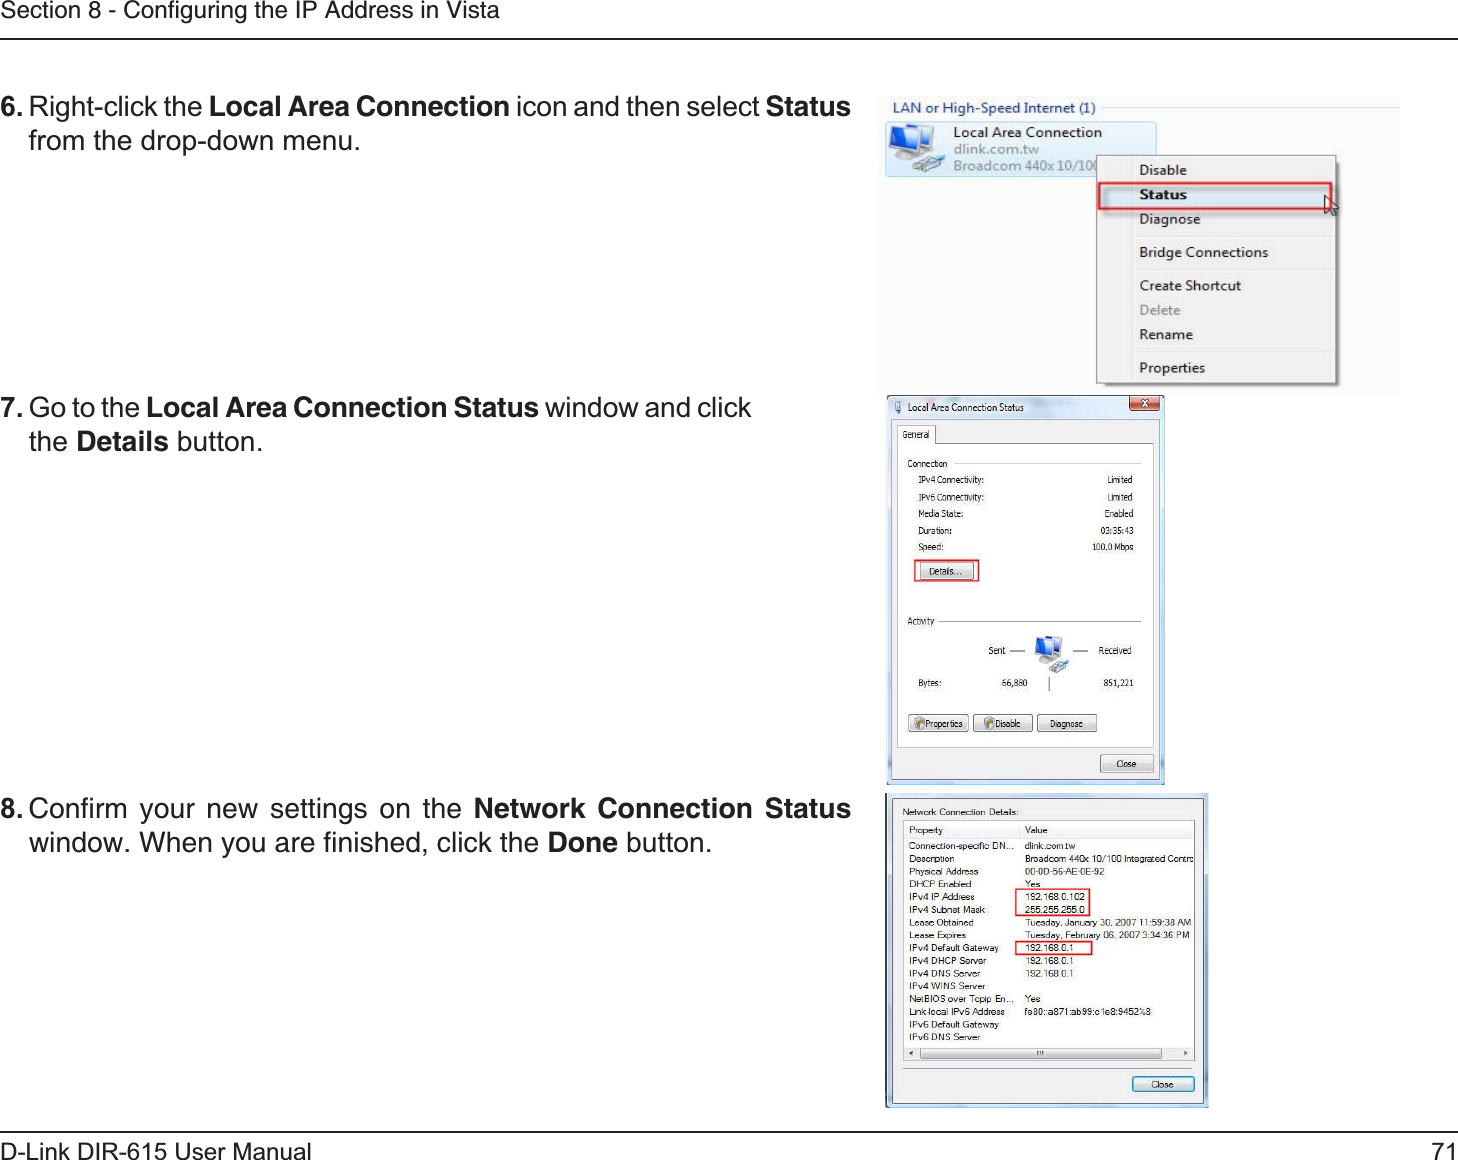 71D-Link DIR-615 User ManualSection 8 - Conﬁguring the IP Address in Vista6. Right-click the Local Area Connection icon and then select Statusfrom the drop-down menu. 7. Go to the Local Area Connection Status window and click the Details button. 8. Conﬁrm your new settings on the Network Connection Status window. When you are ﬁnished, click the Done button. 